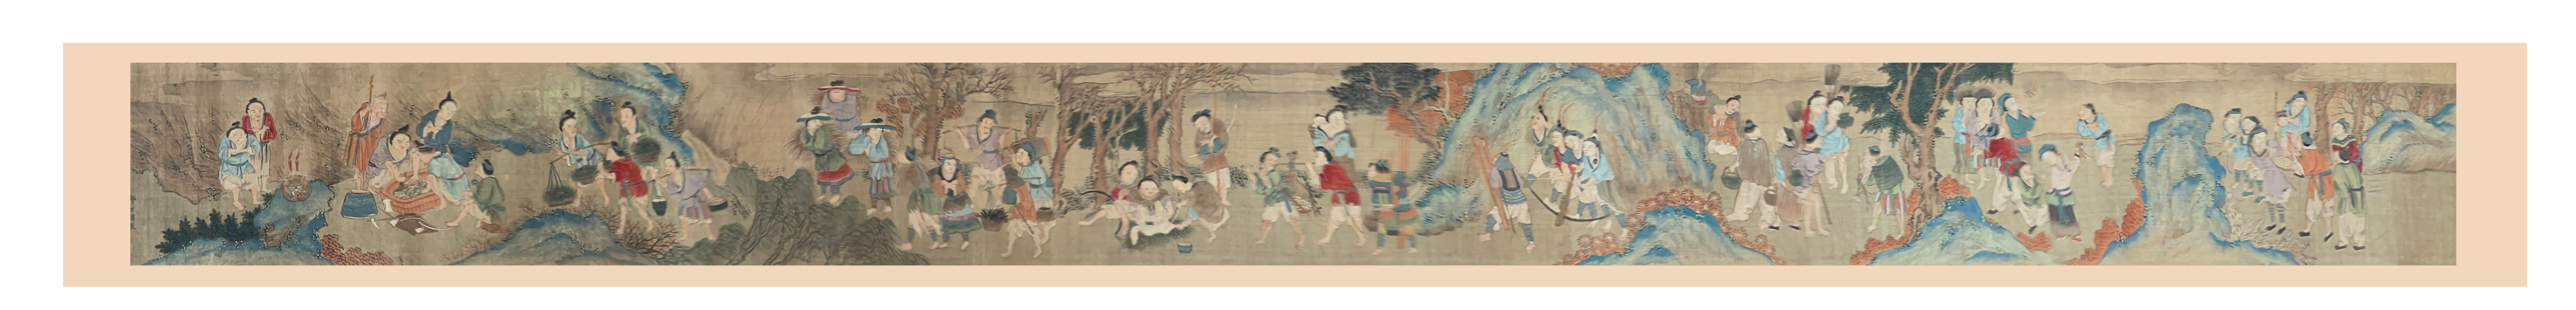 CHINESE LONG SCROLL PAINTING OF